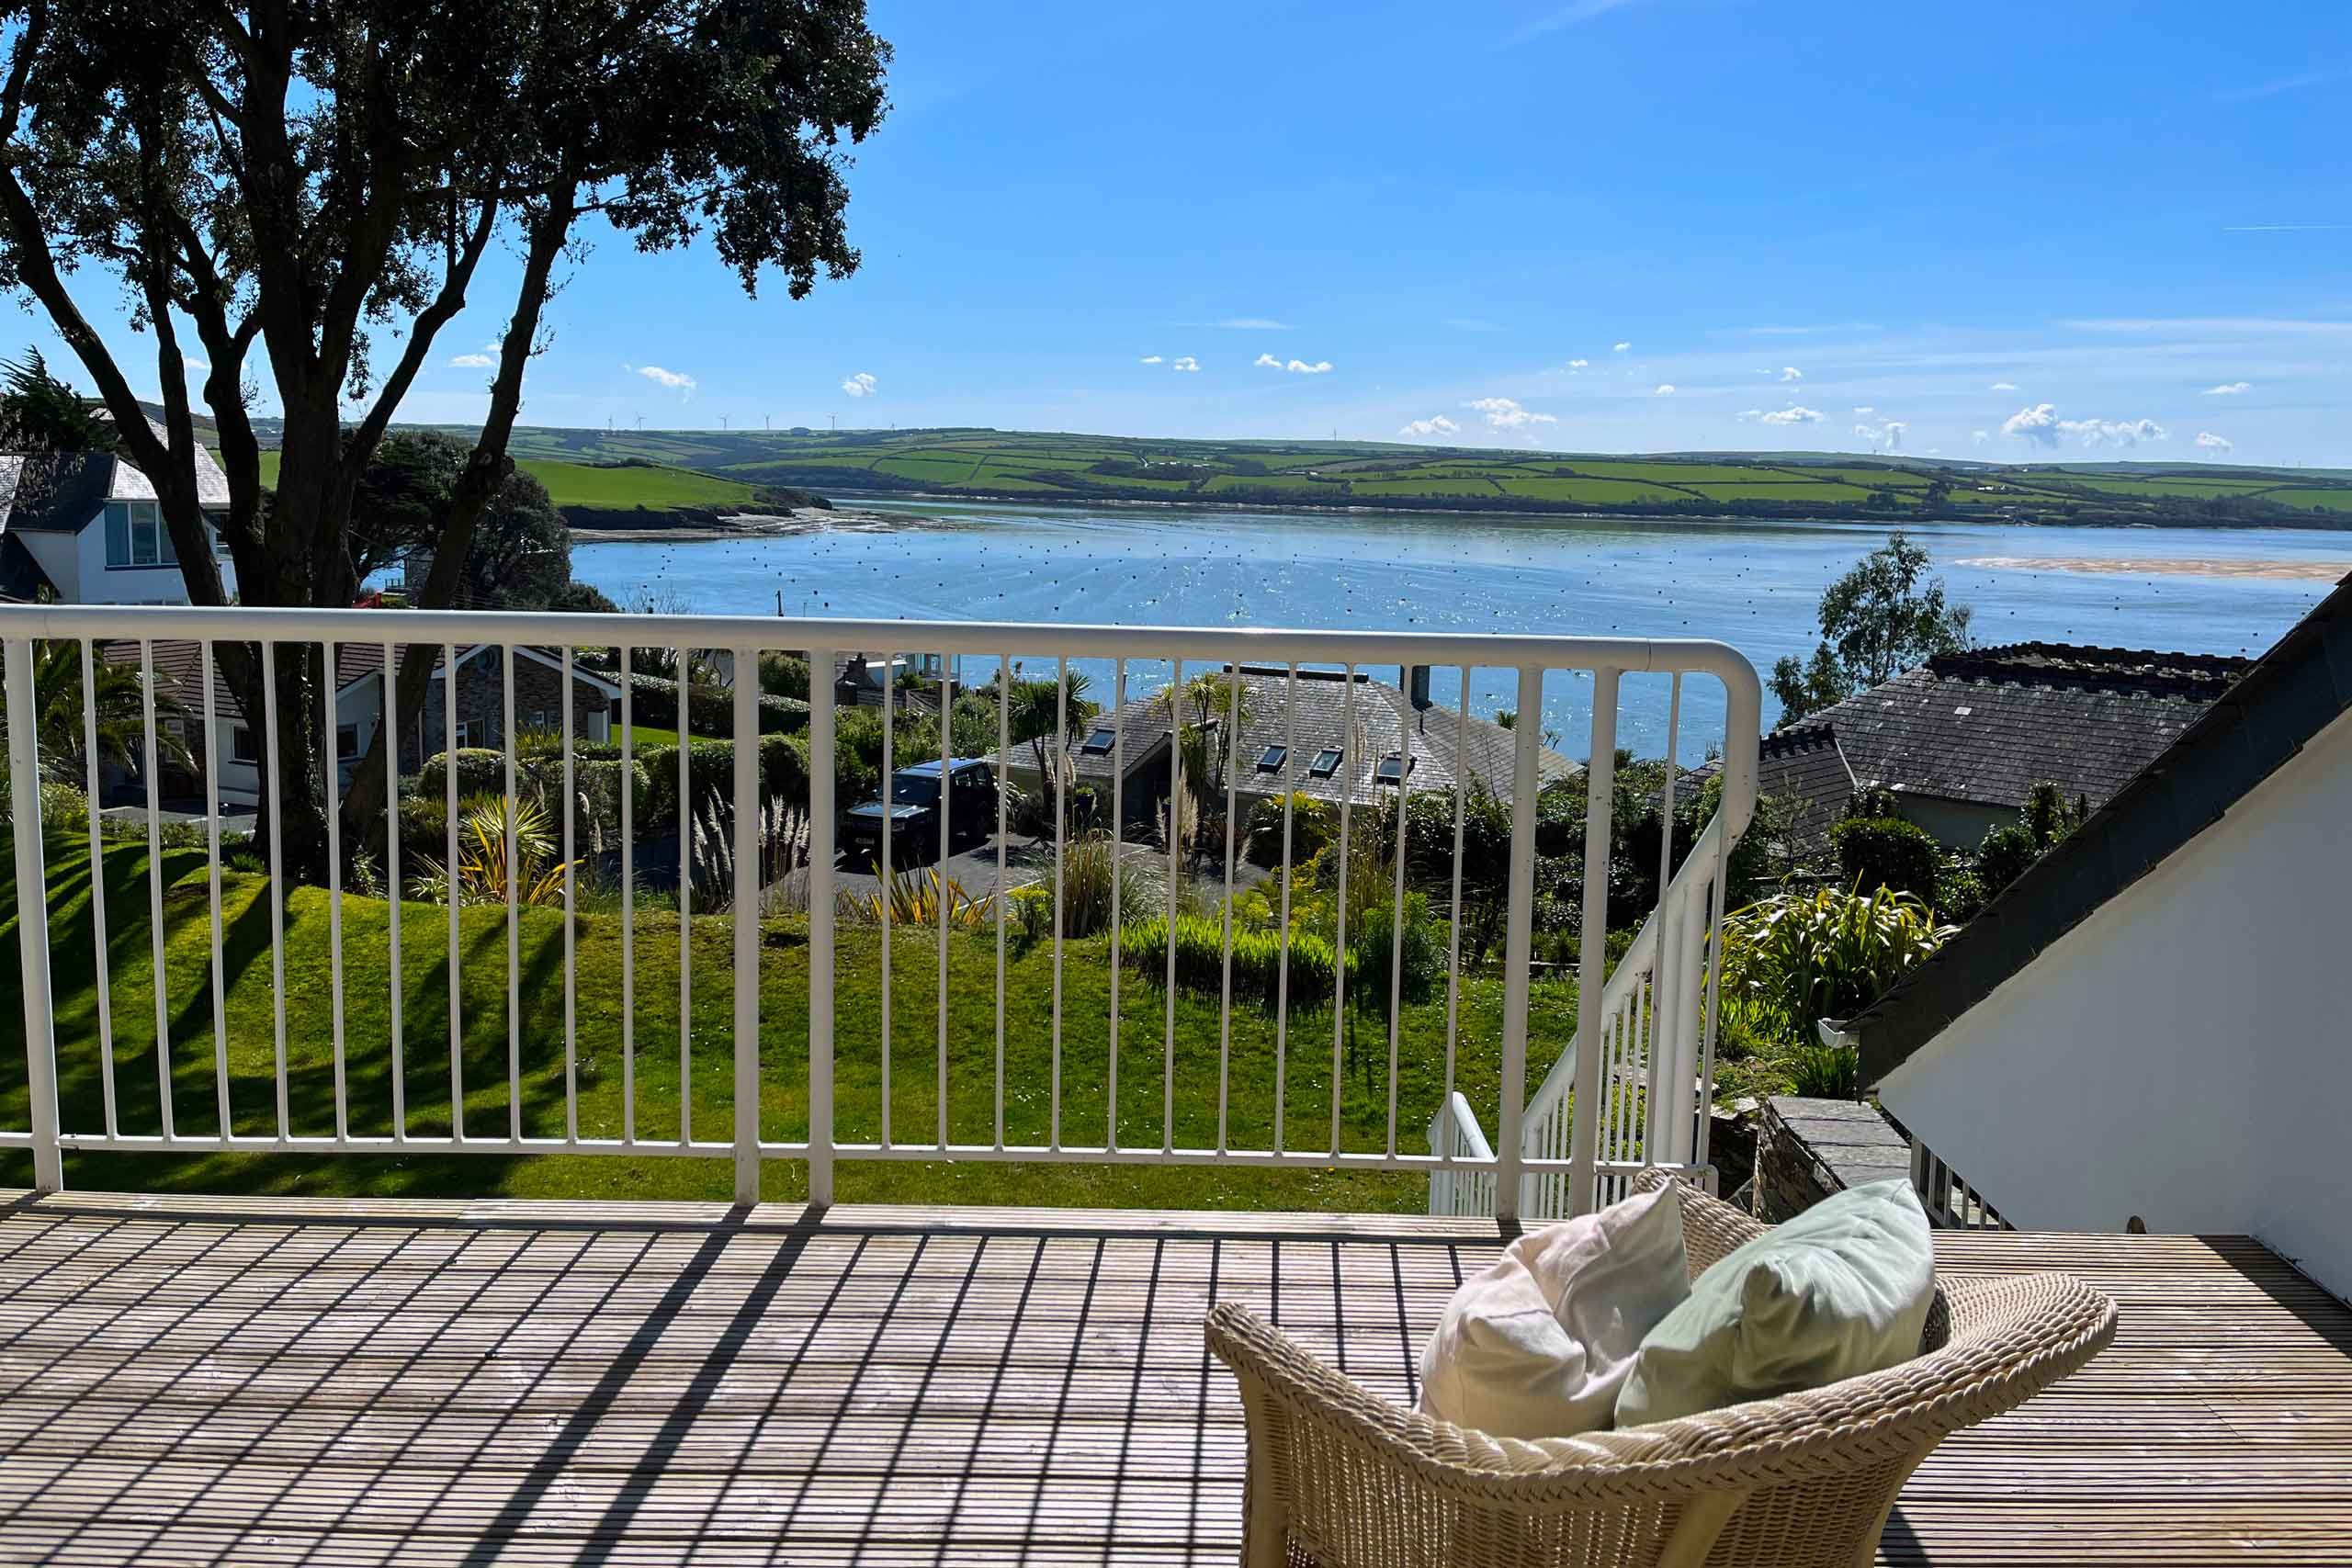 View over the Camel estuary from Tomhara's balcony.